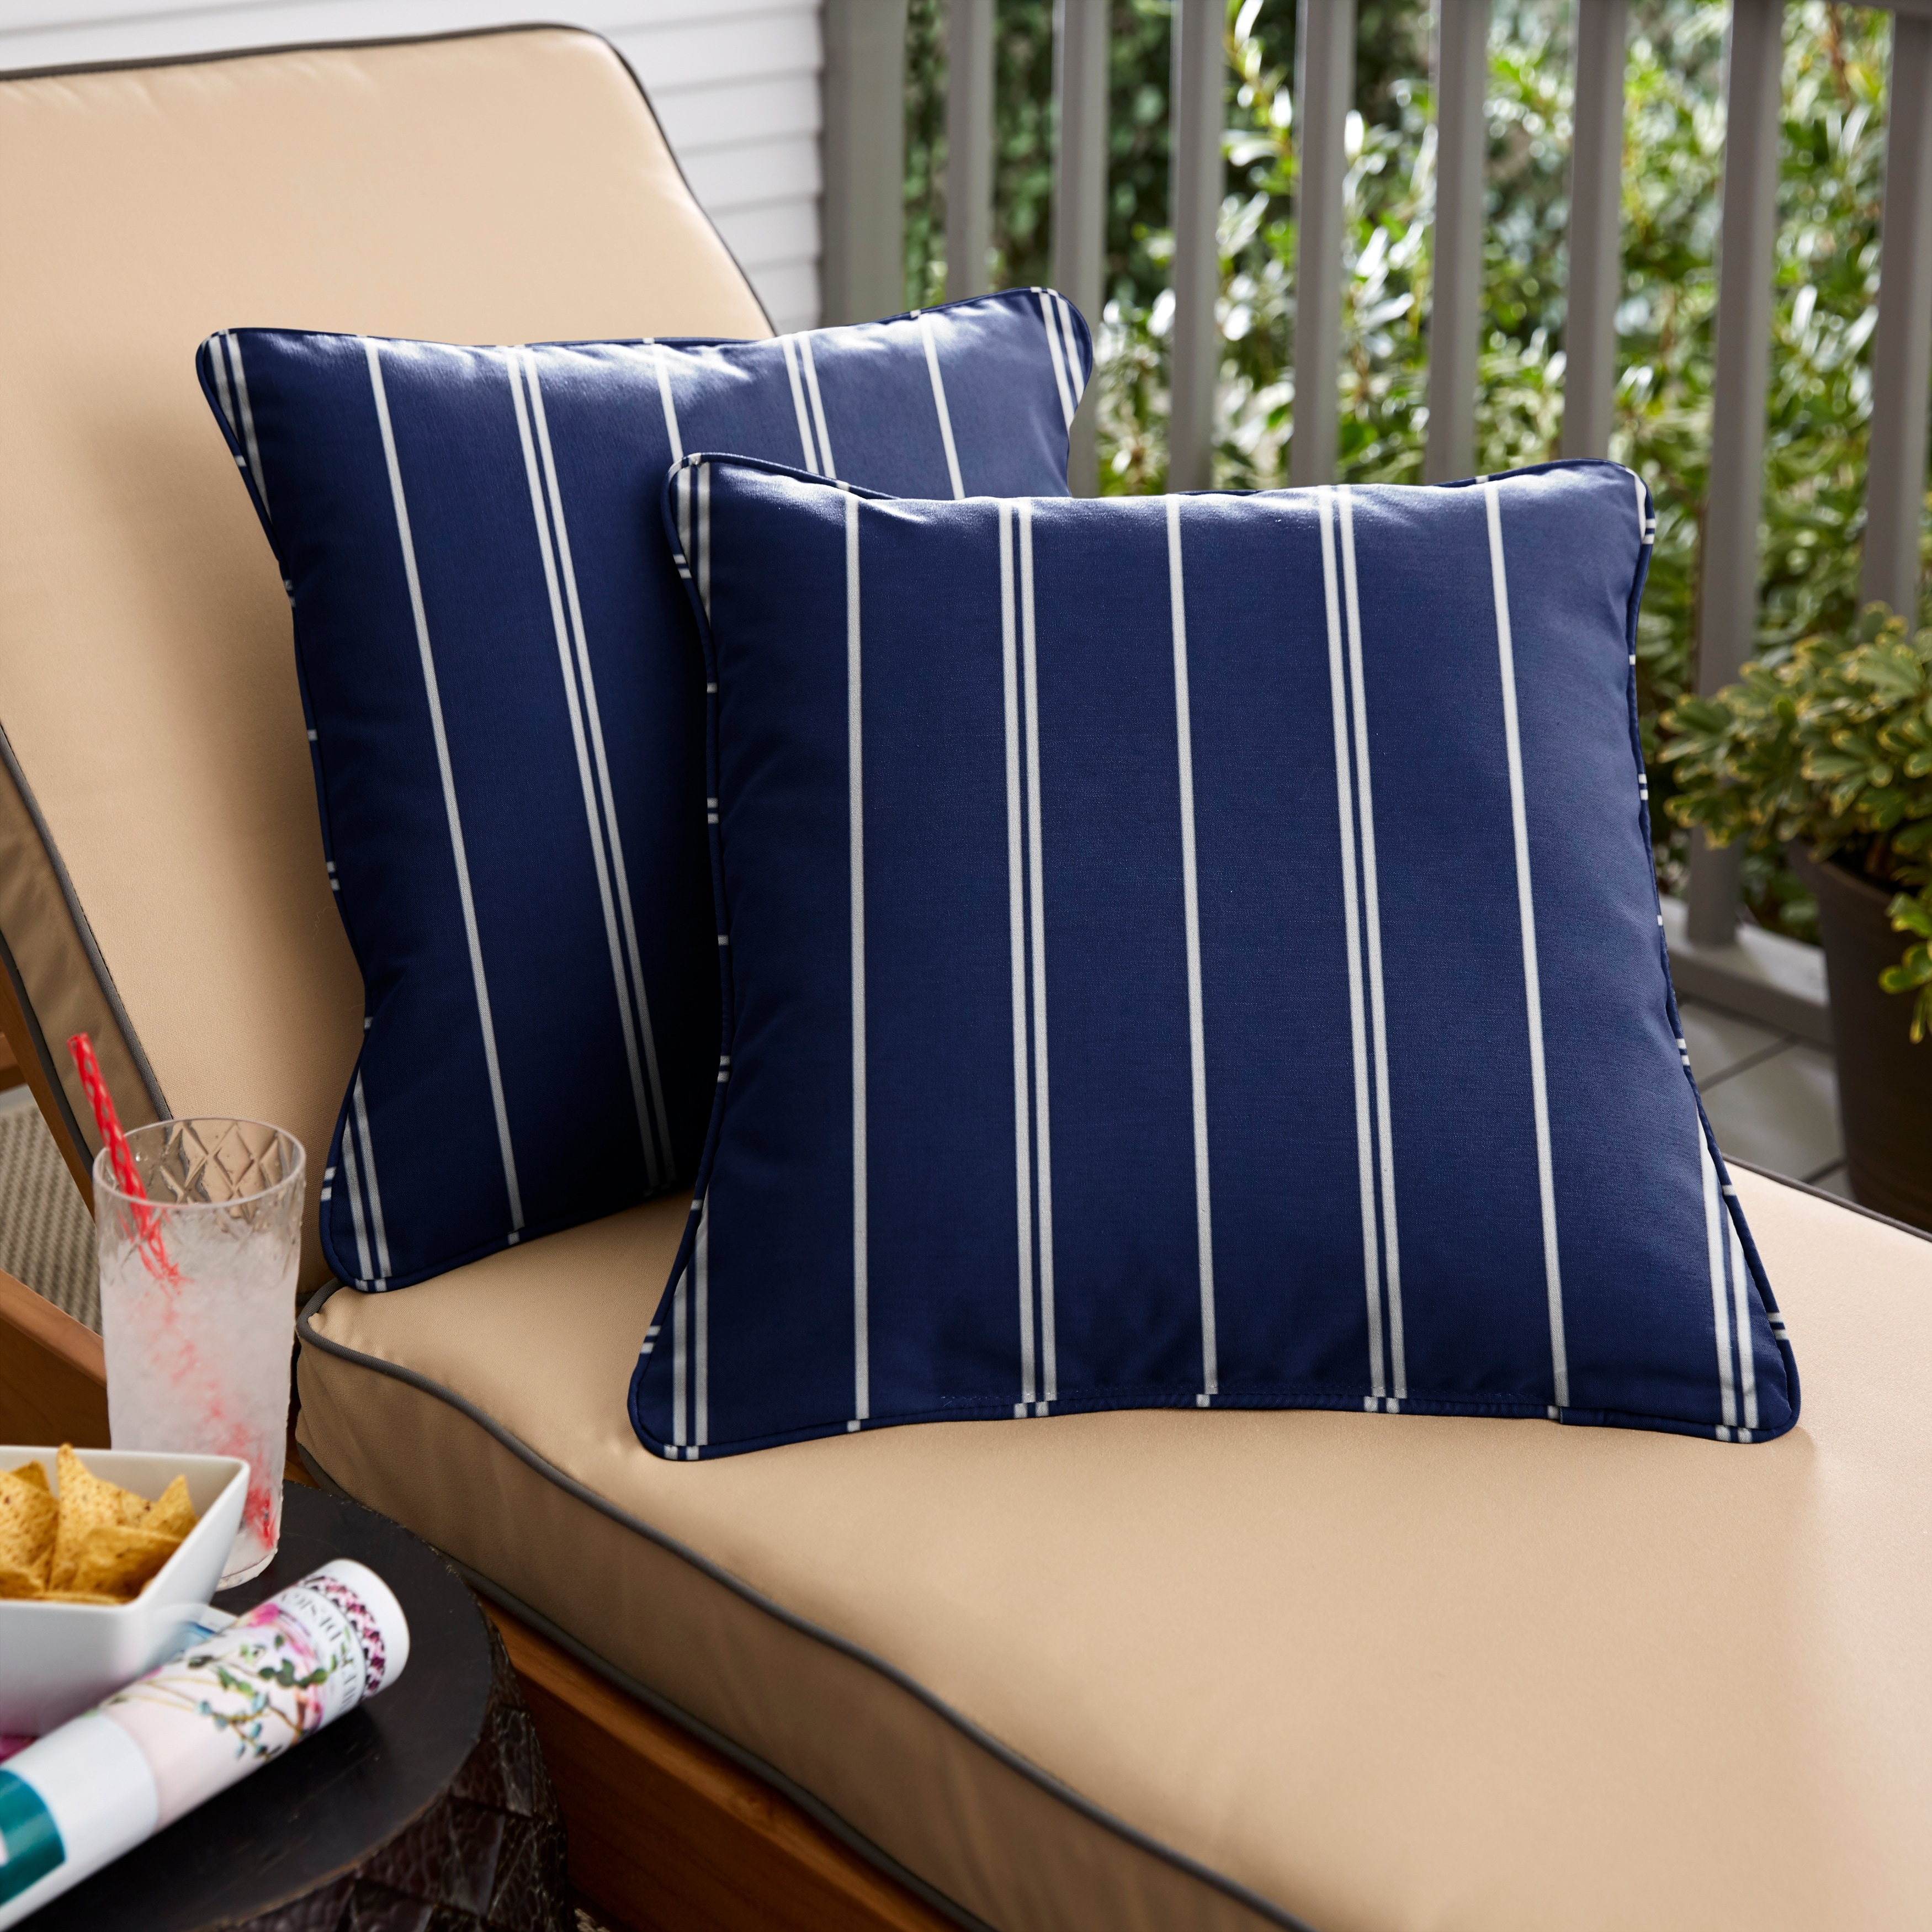 https://ak1.ostkcdn.com/images/products/is/images/direct/95ec438f0d0eeea609bf7e046a4b3589f602d43a/Navy-with-White-Stripes-Indoor-Outdoor-Pillows%2C-Set-of-2%2C-Corded.jpg